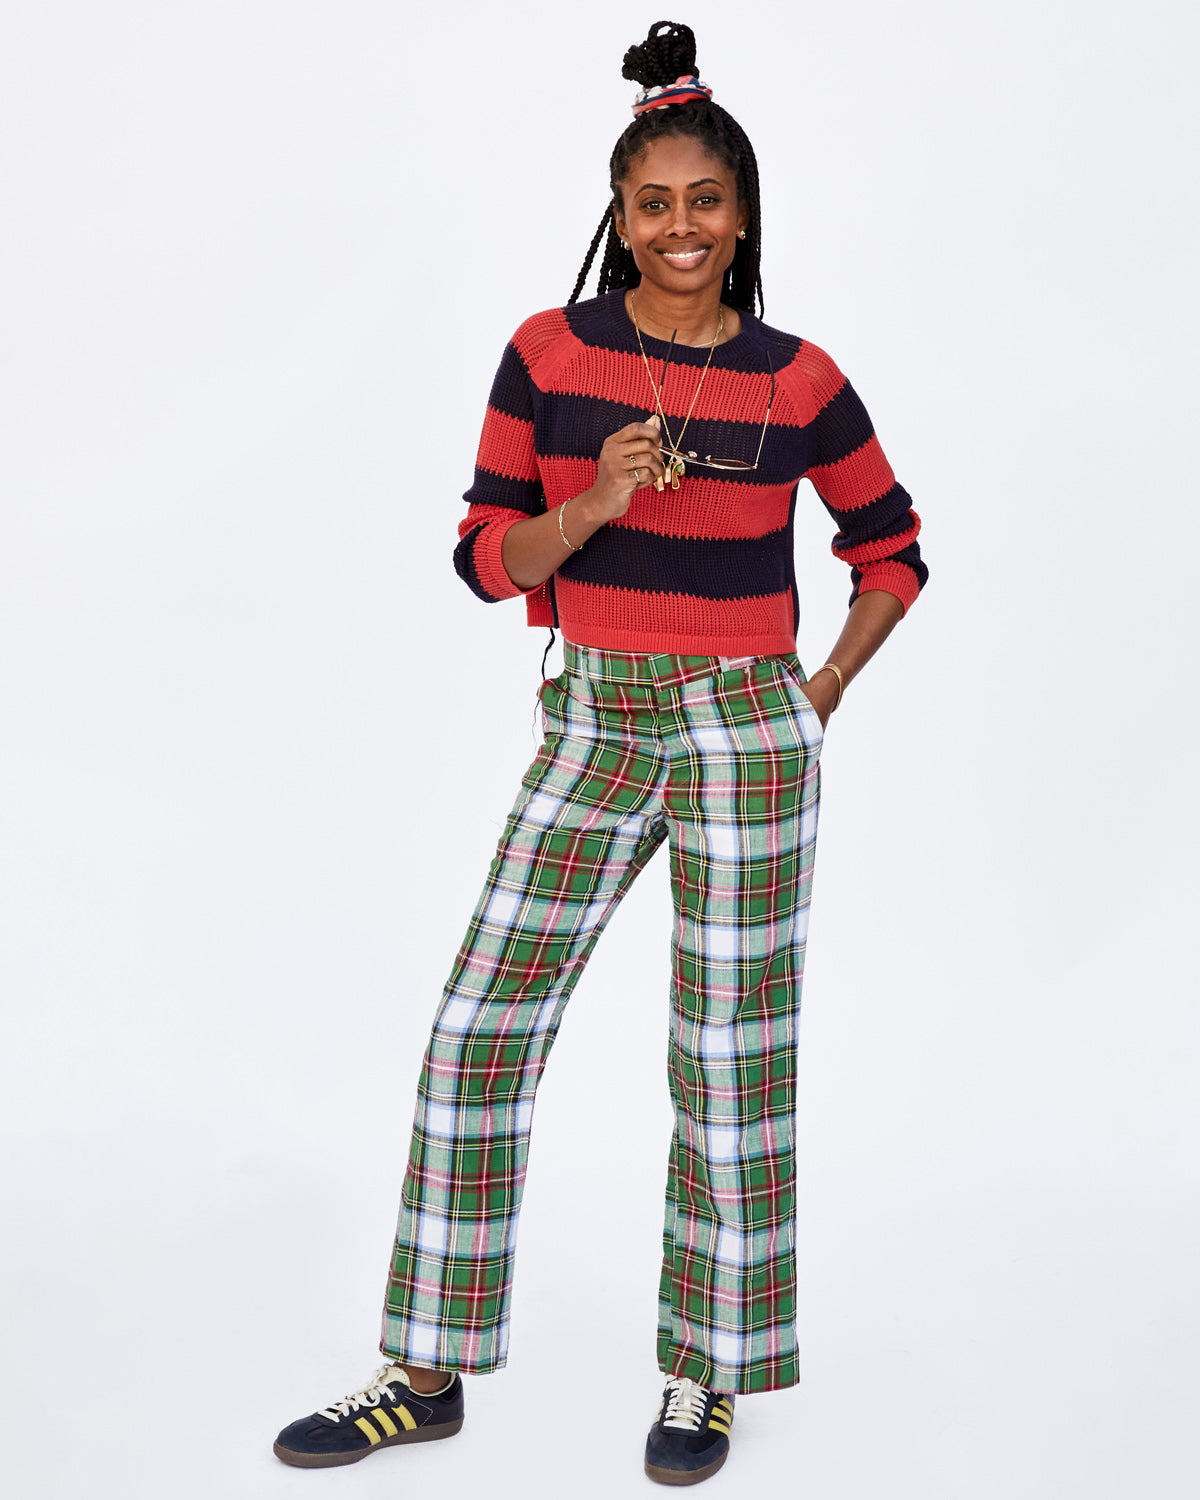 Mecca in Sneakers, Plaid Pants and the Navy & Poppy Striped Open Weave Raglan Sweater